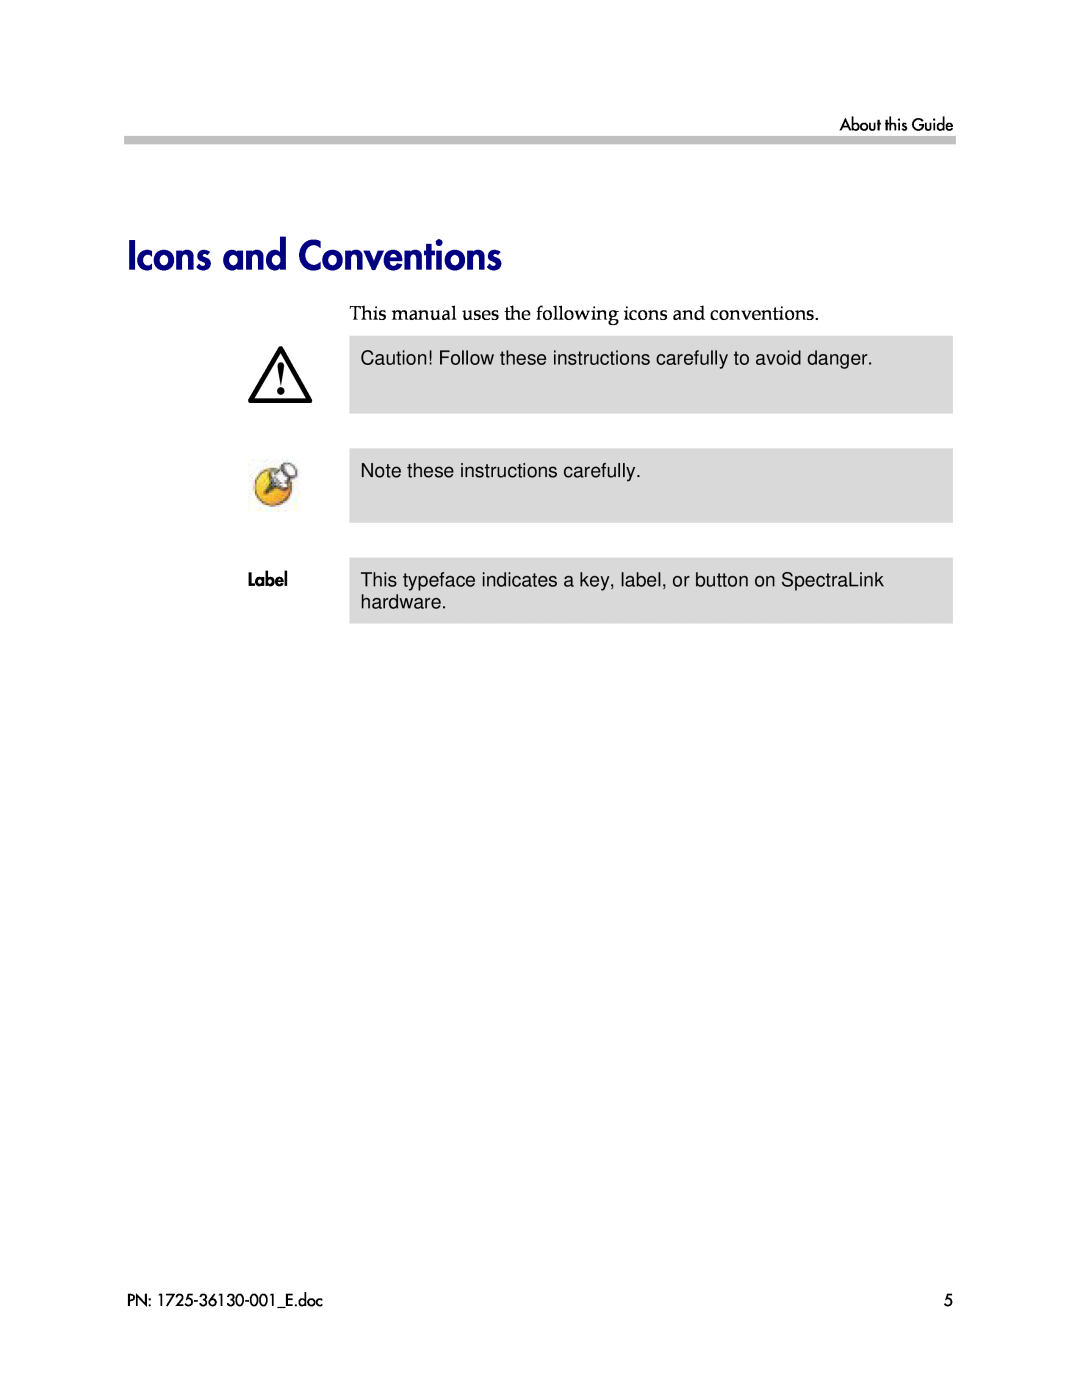 Polycom SPECTRALINK 6000 Icons and Conventions, Caution! Follow these instructions carefully to avoid danger, hardware 